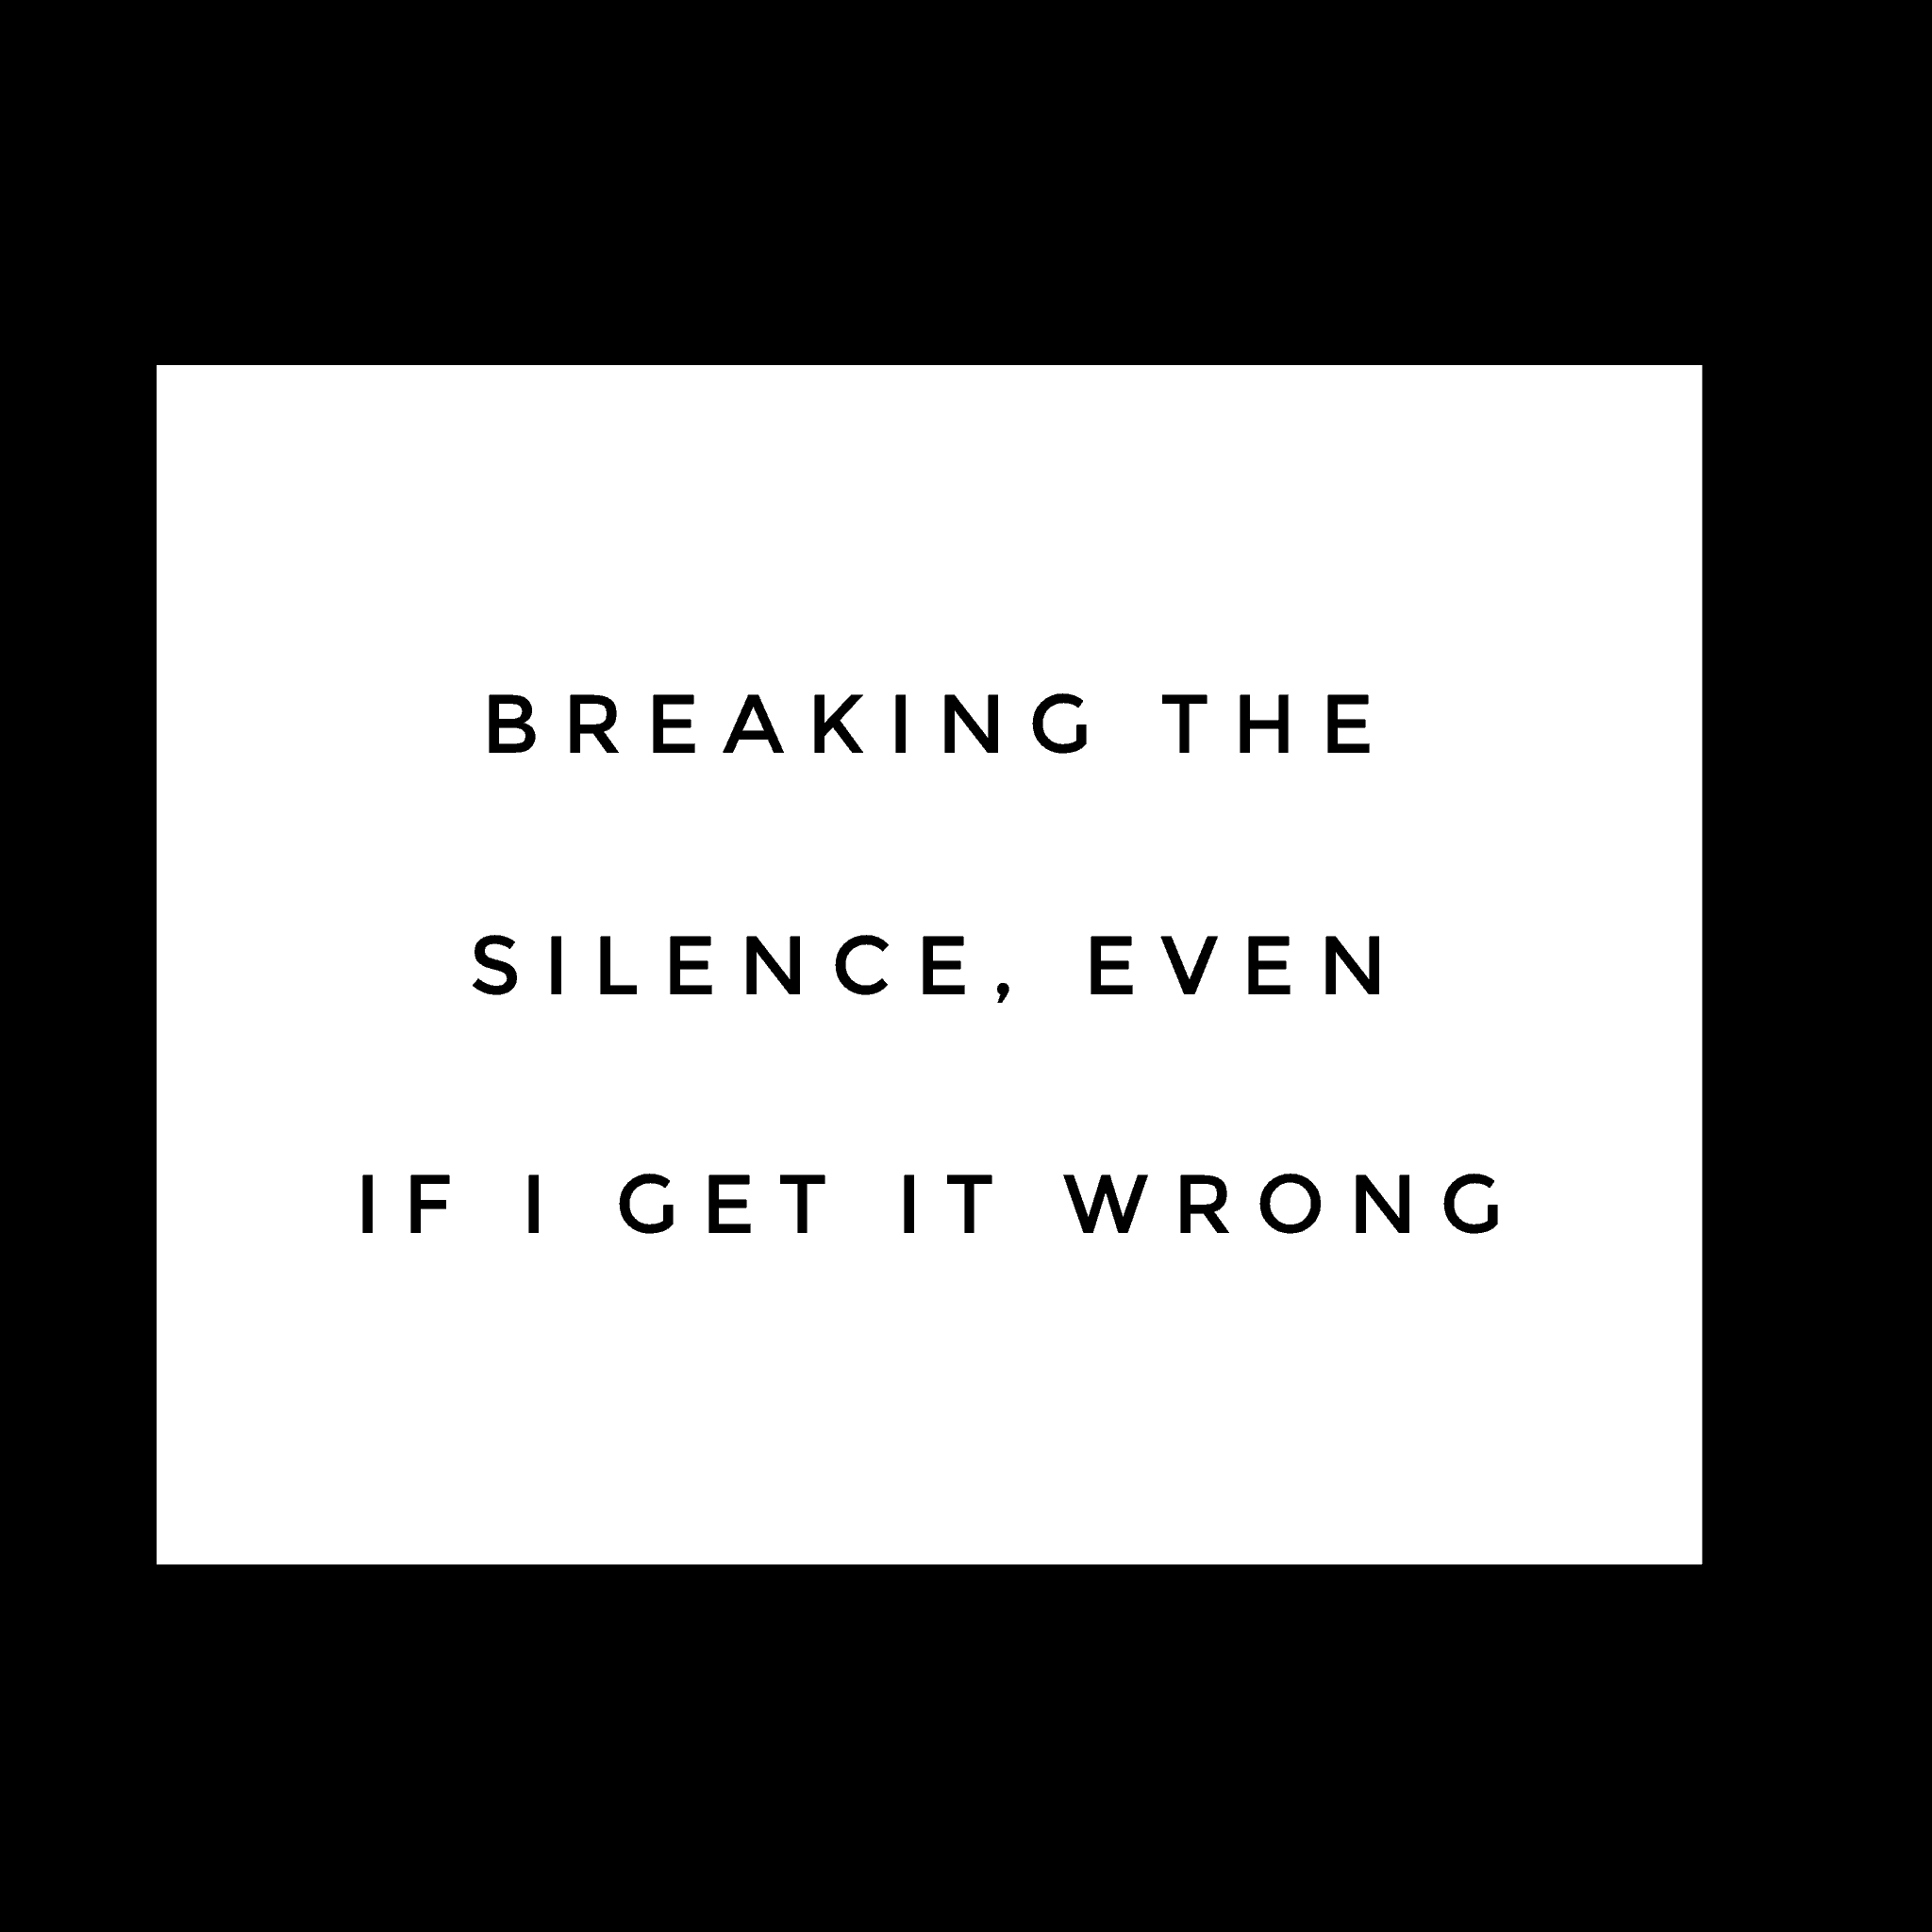 No More Silence, Even If We Get It Wrong